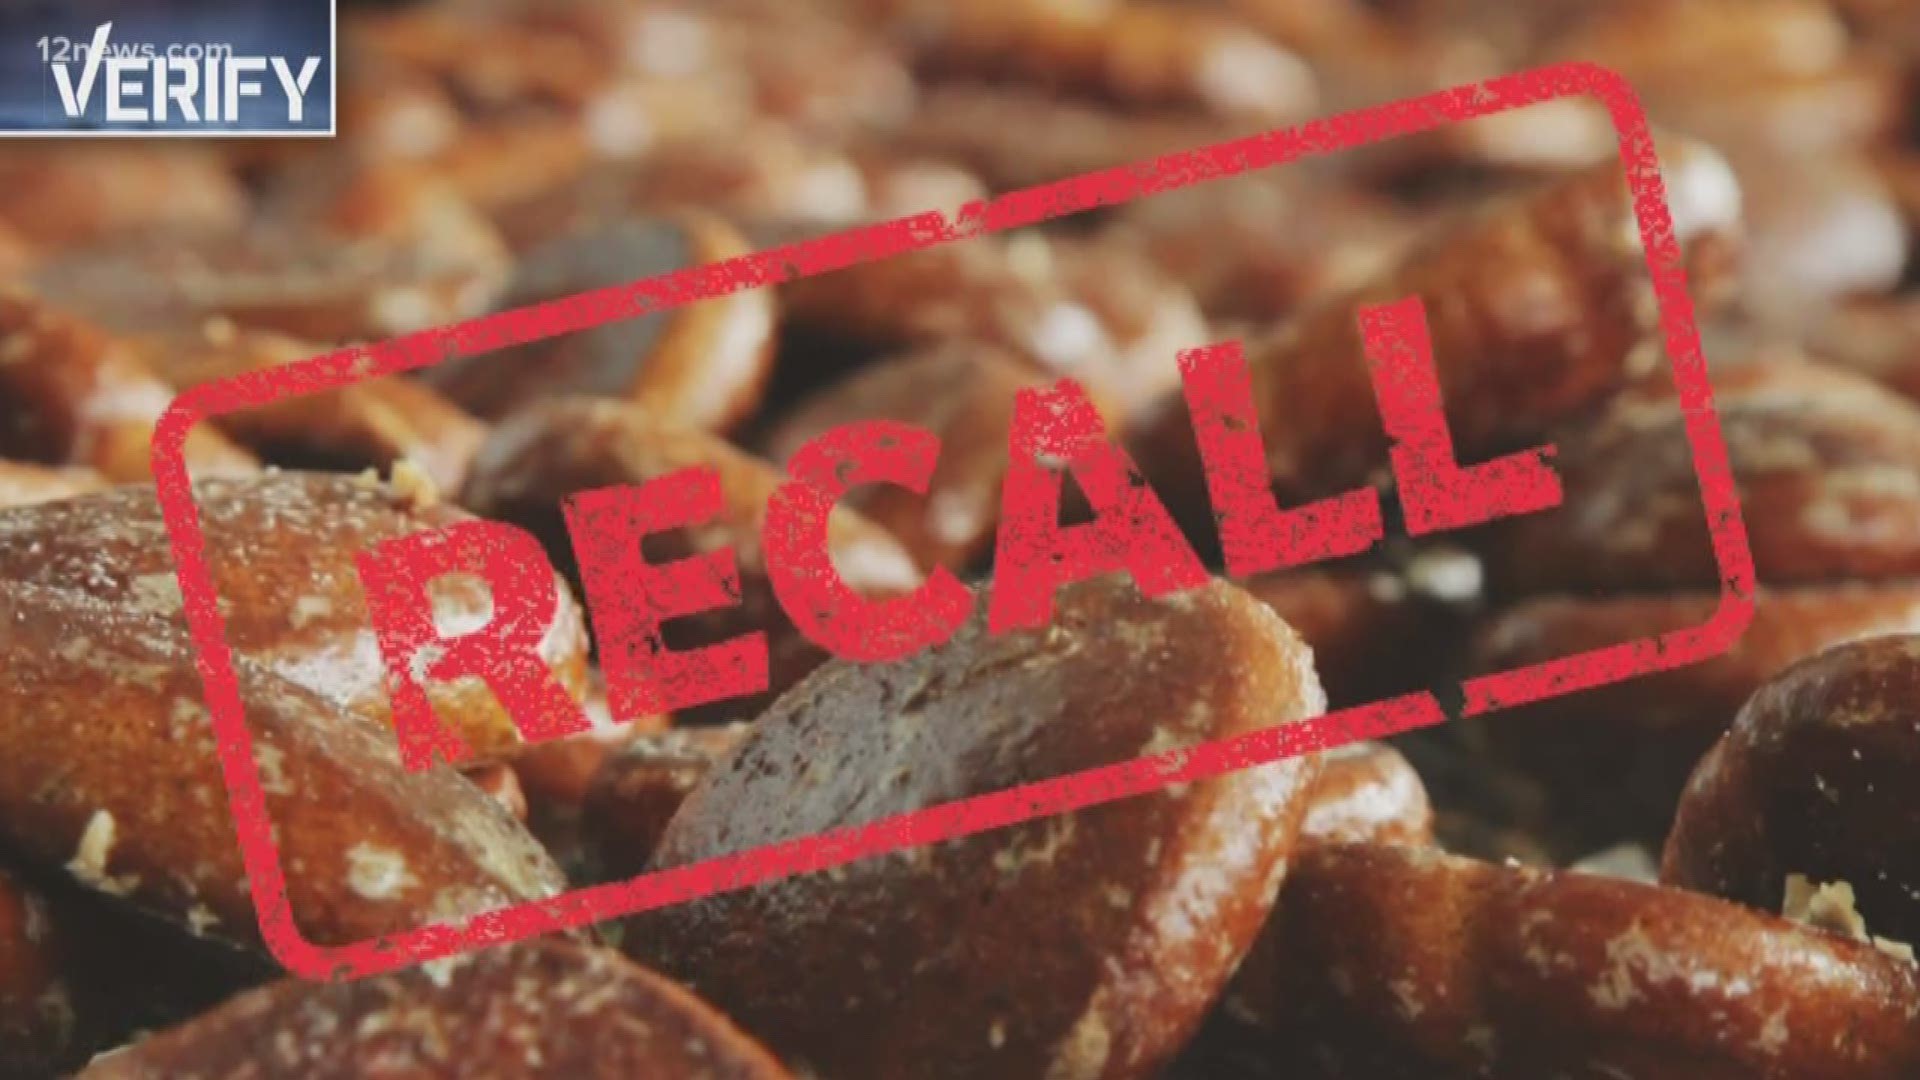 Dozens of foods have been recalled this year. We verify what goes into the process of recalling foods.